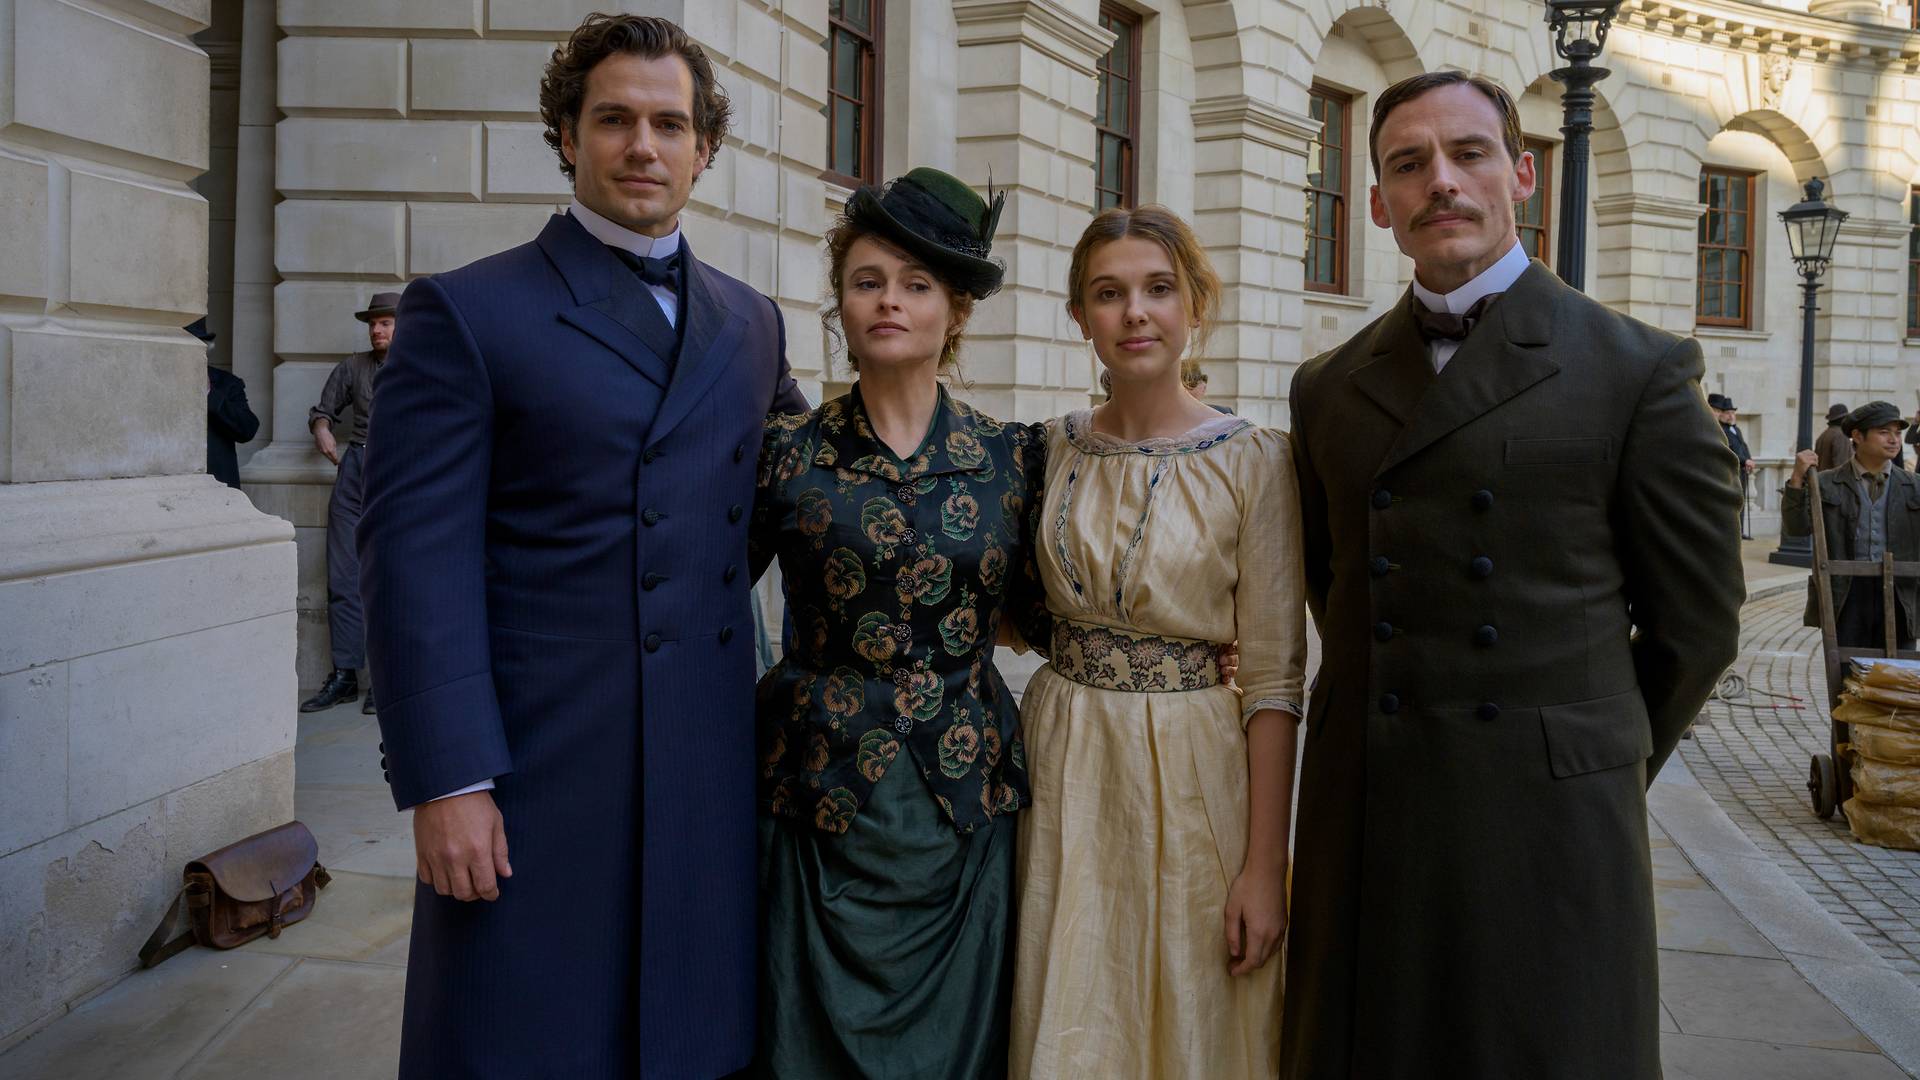 Henry Cavill As Millie Bobby Brown's Brother In Enola Holmes: “I Switch Off When She Starts Talking About Reality Shows”